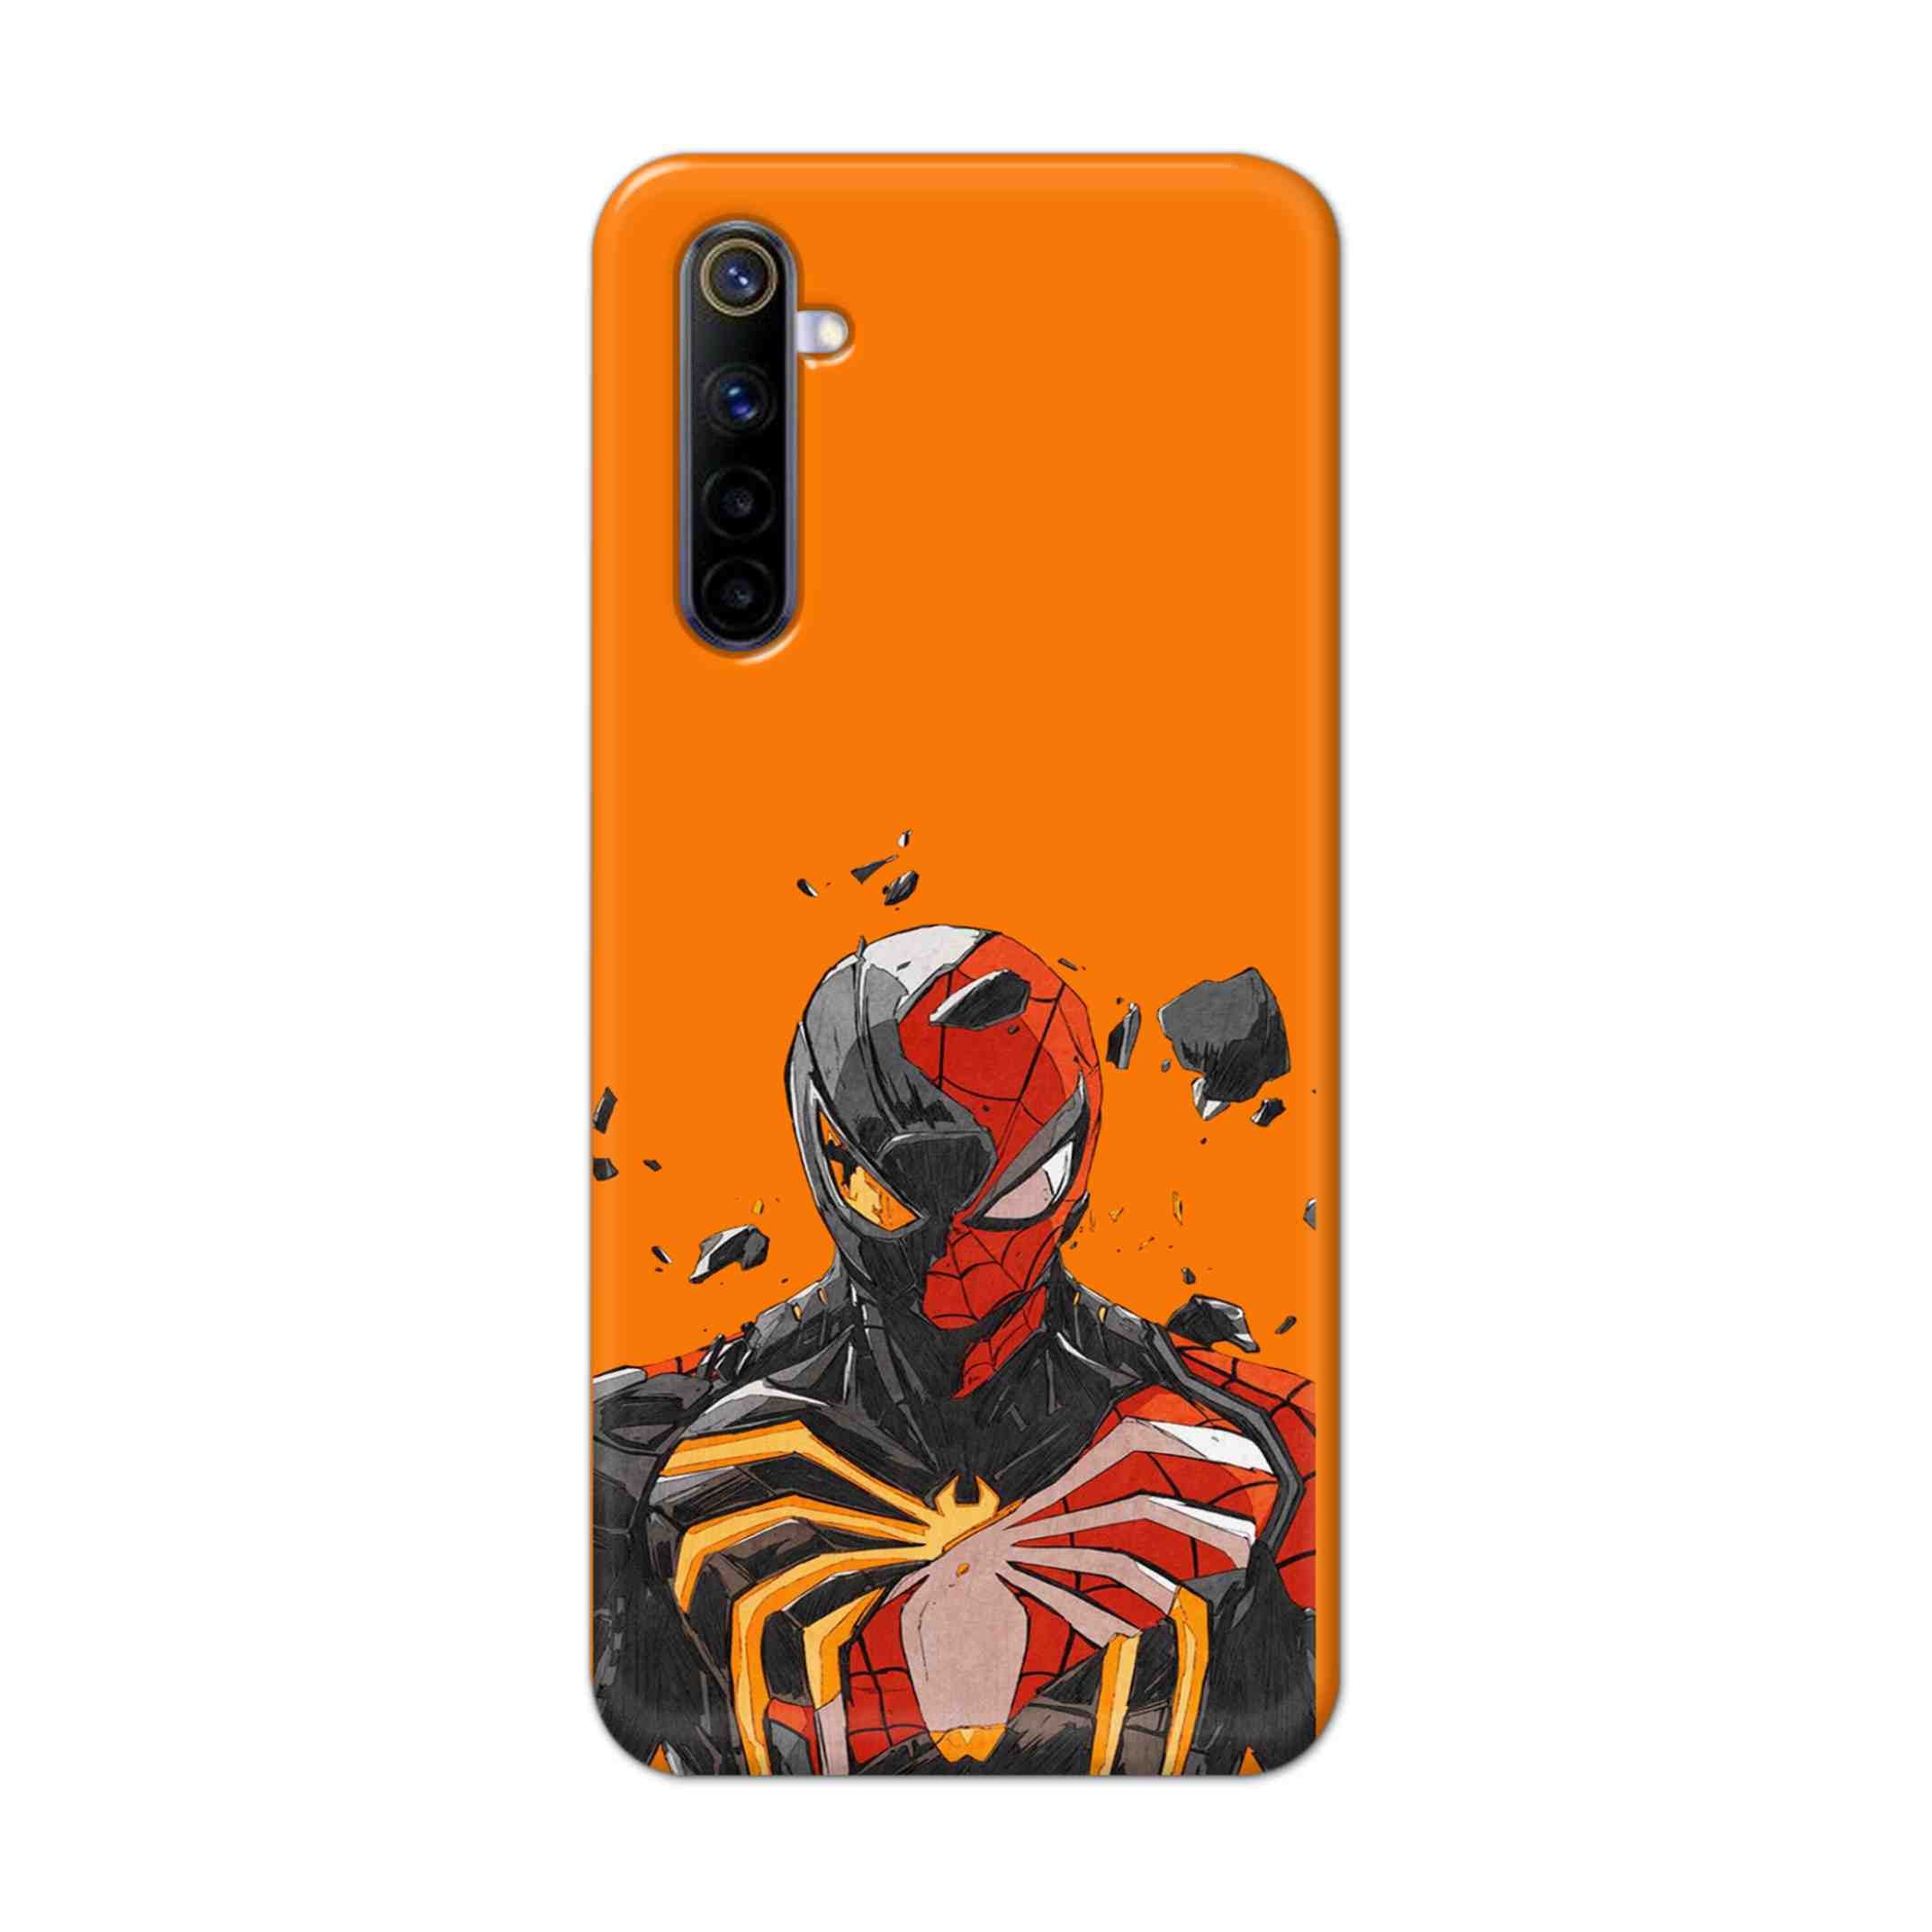 Buy Spiderman With Venom Hard Back Mobile Phone Case Cover For REALME 6 PRO Online